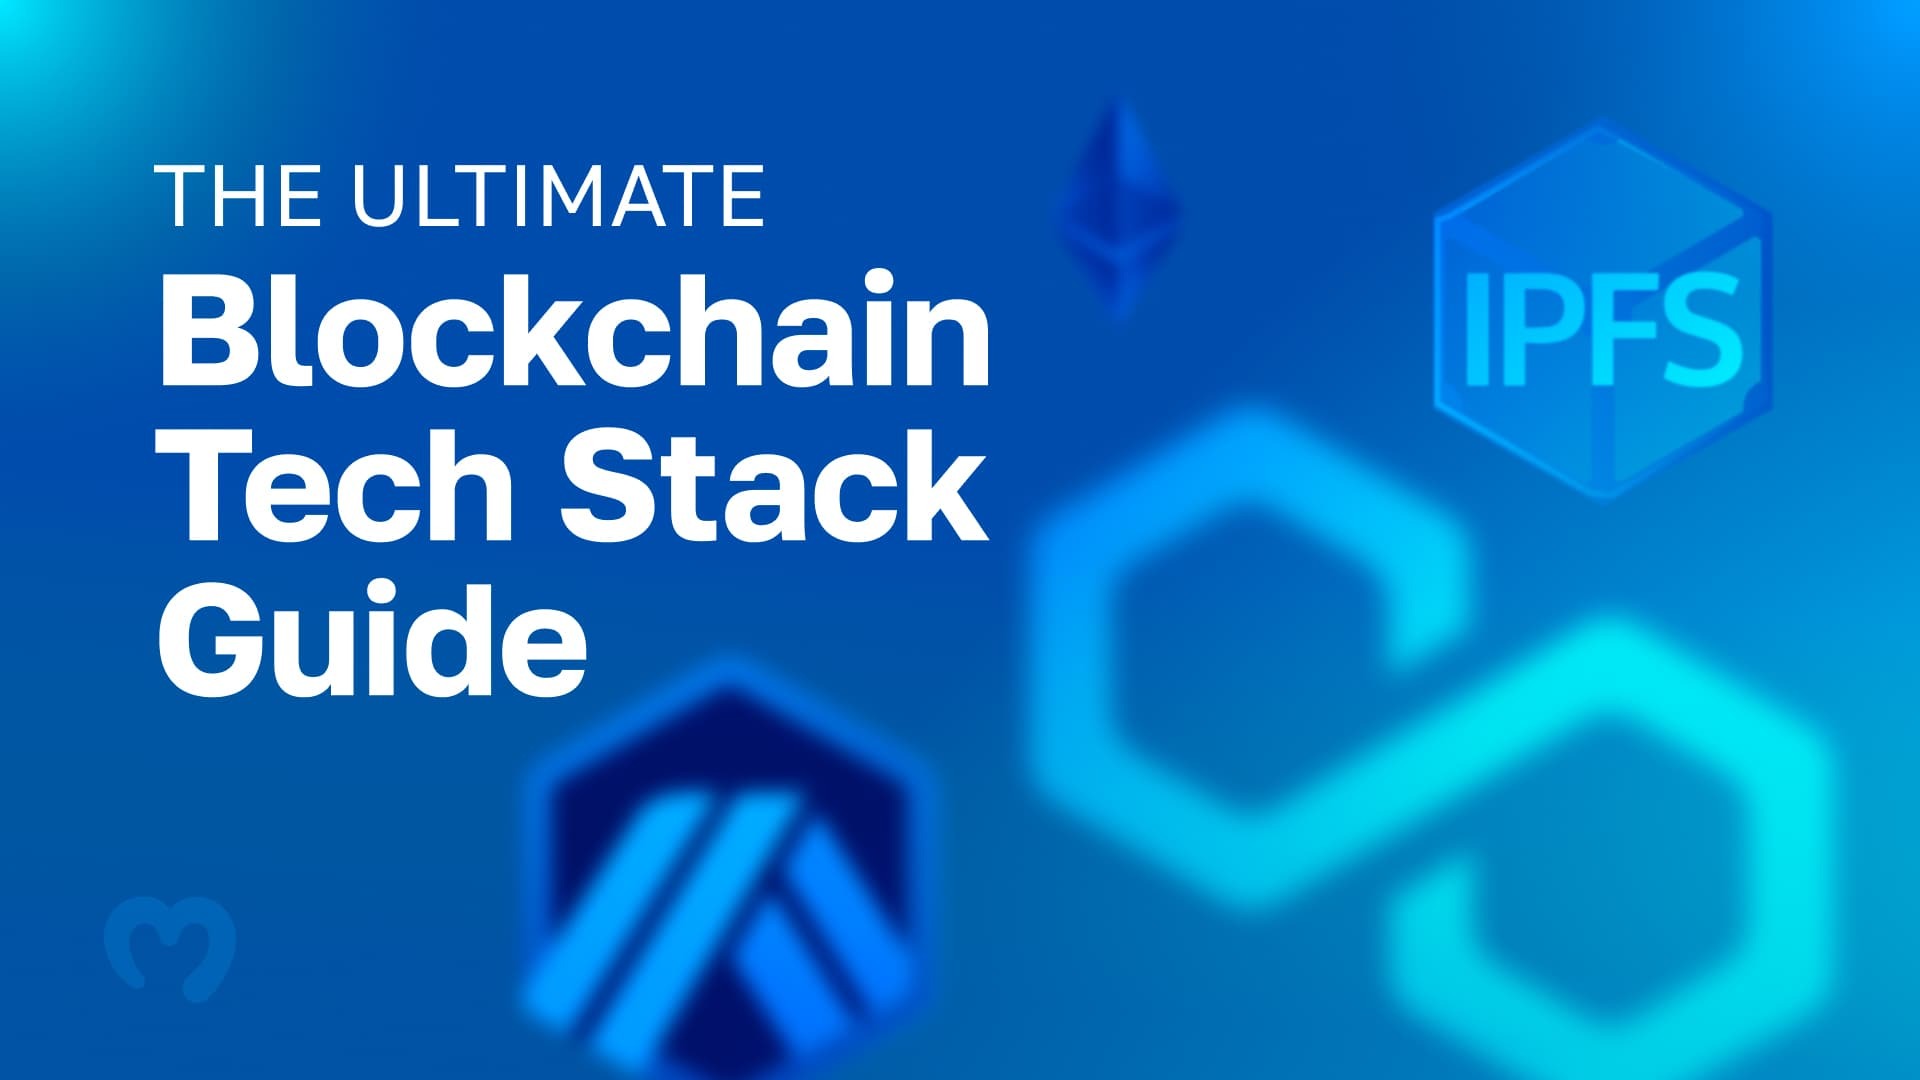 Multiple tools from the blockchaint tech stack shown in the background, such as IPFS and Ethereum, and in the front there is a bold white text that states The Ultimate Blockchain Tech Stack Guide.